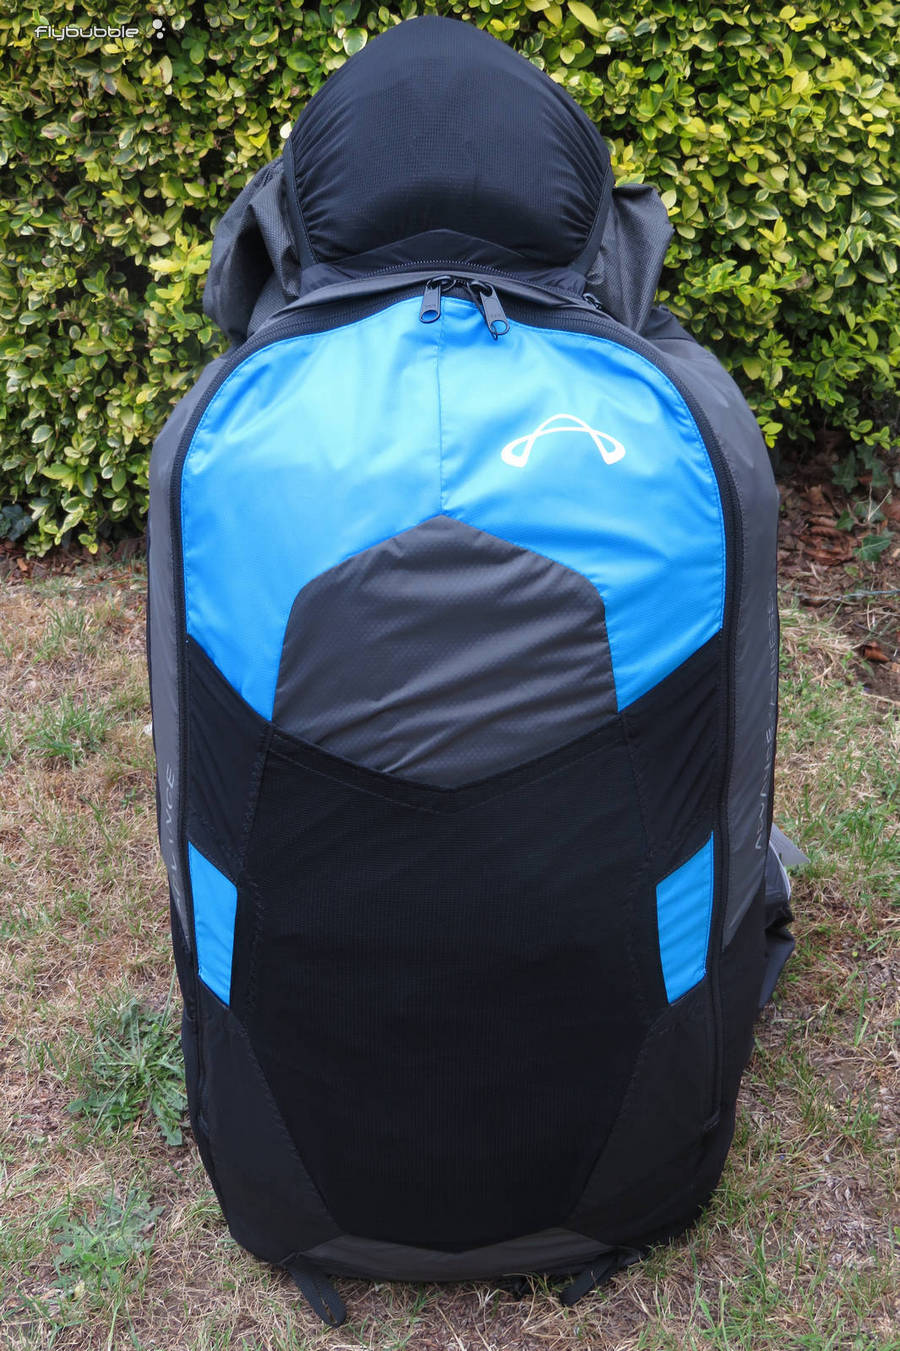 The rucksack with helmet on top - Advance EASINESS 3 paragliding harness review by Flybubble